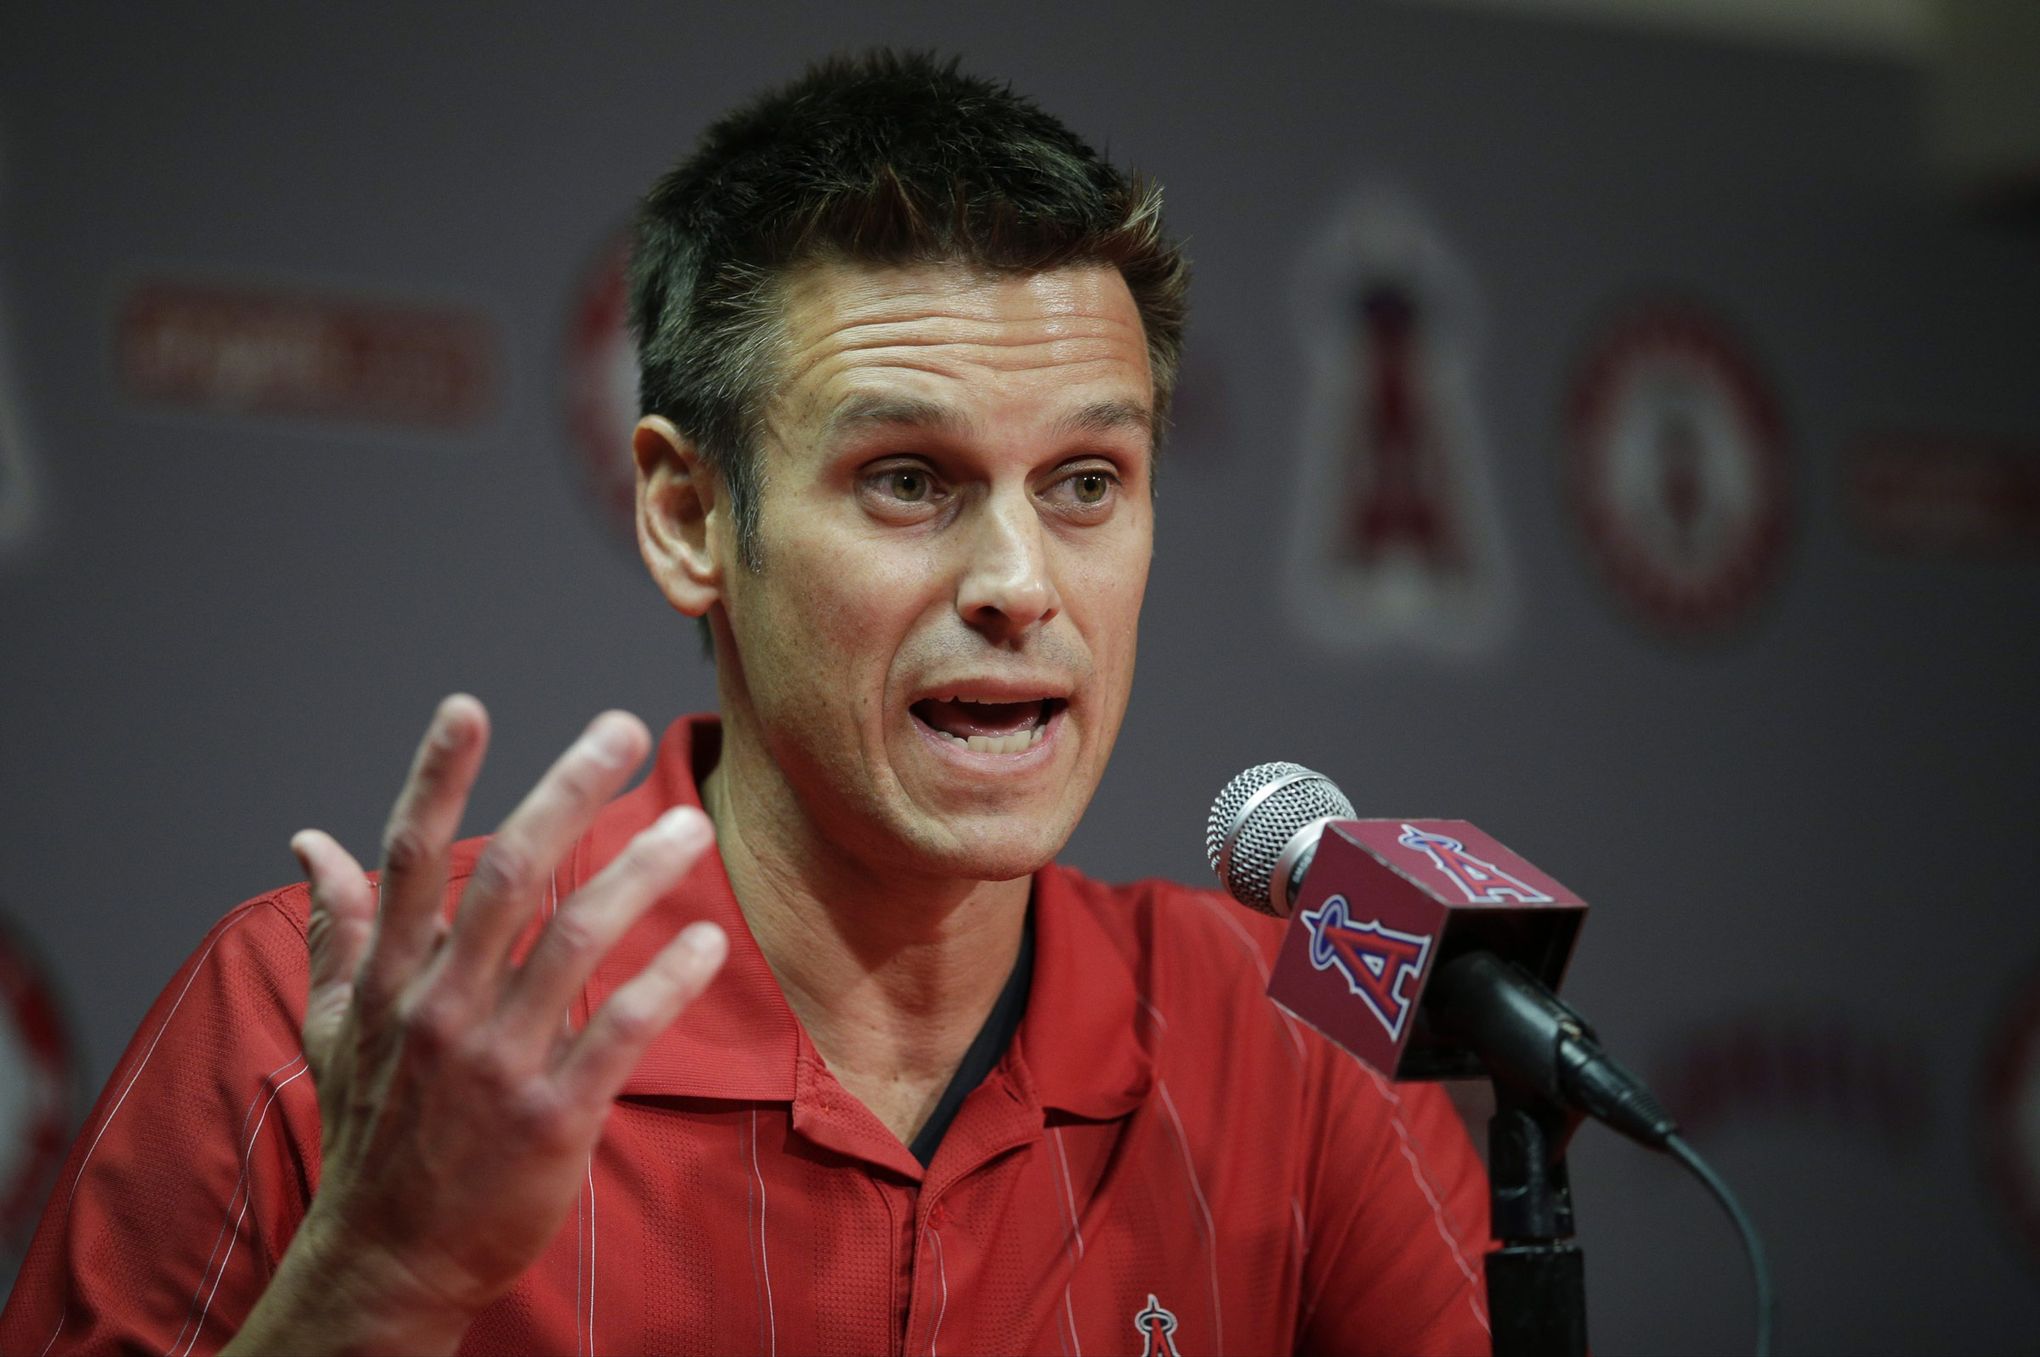 Mariners GM Jerry Dipoto discusses trade deadline, Seager